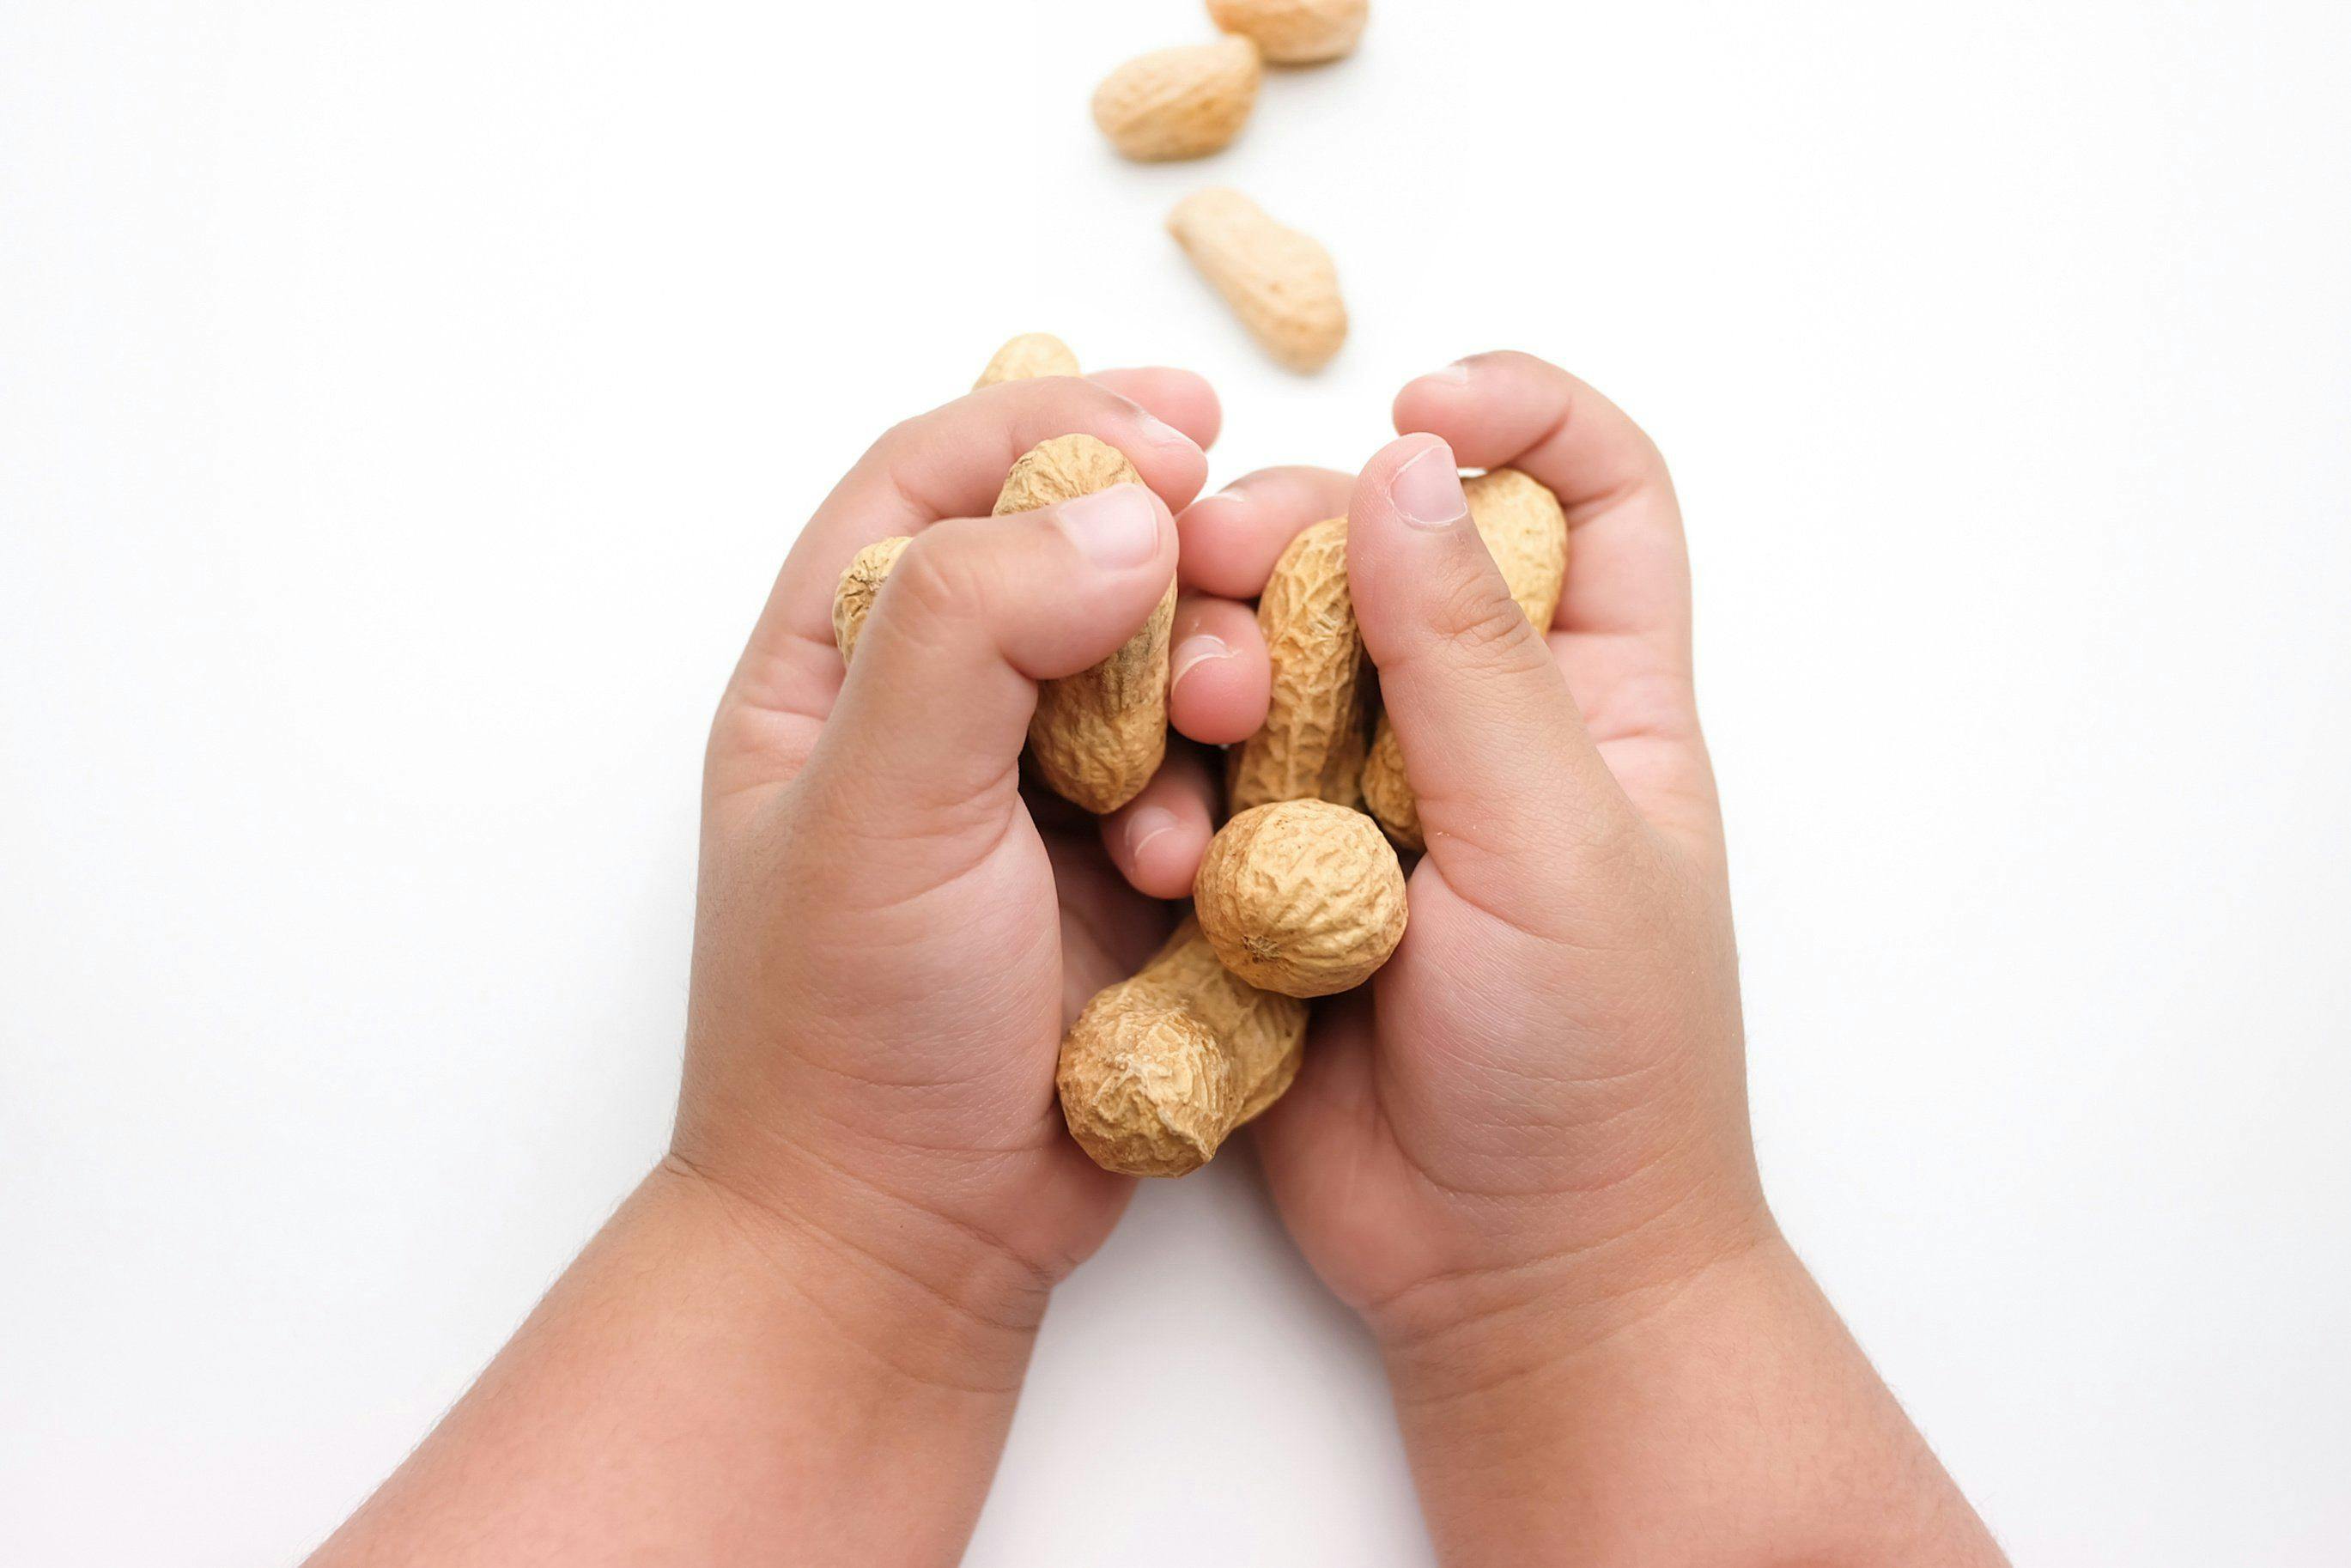 NIAID guidelines on peanuts may apply to other foods